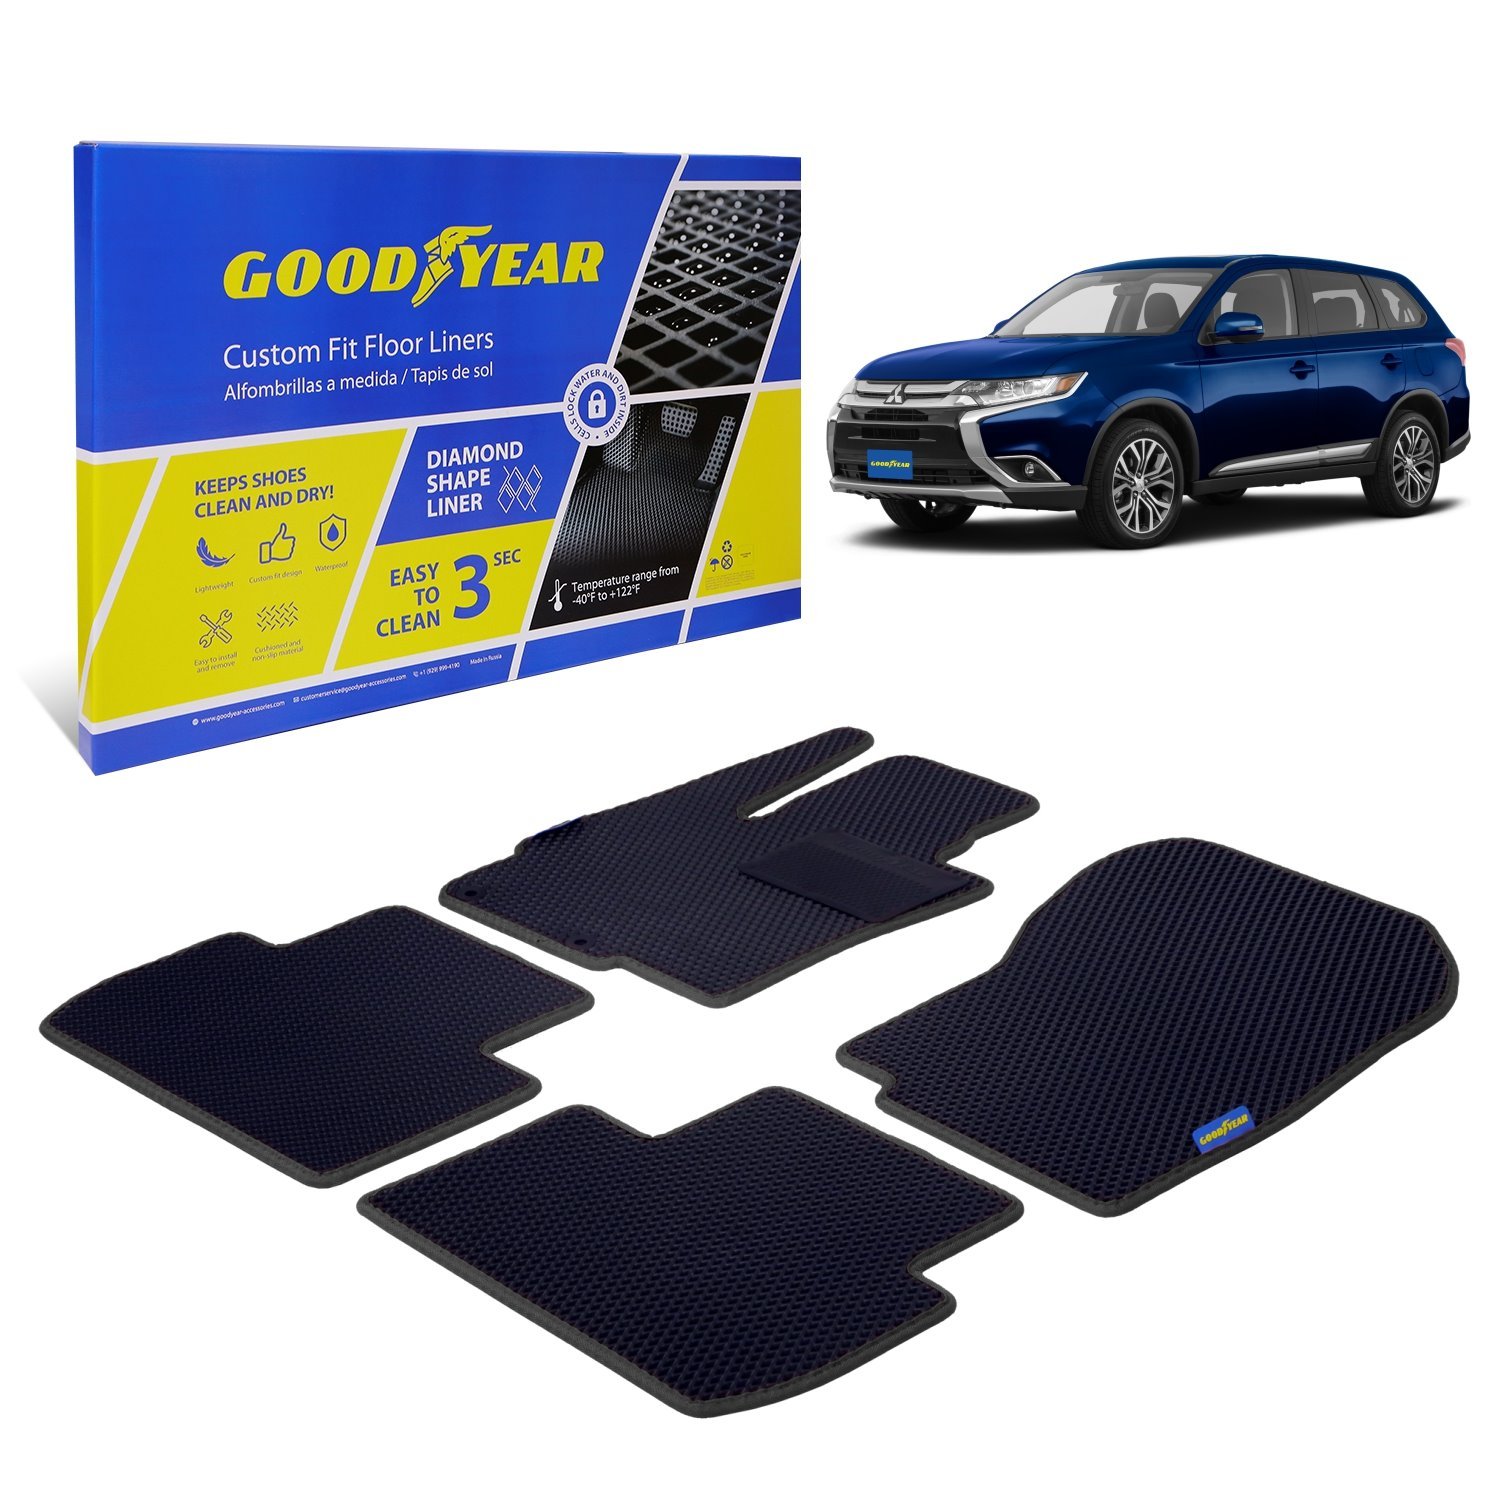 Goodyear Custom-Fit Floor Liners for 2014-2021 Mitsubishi Outlander